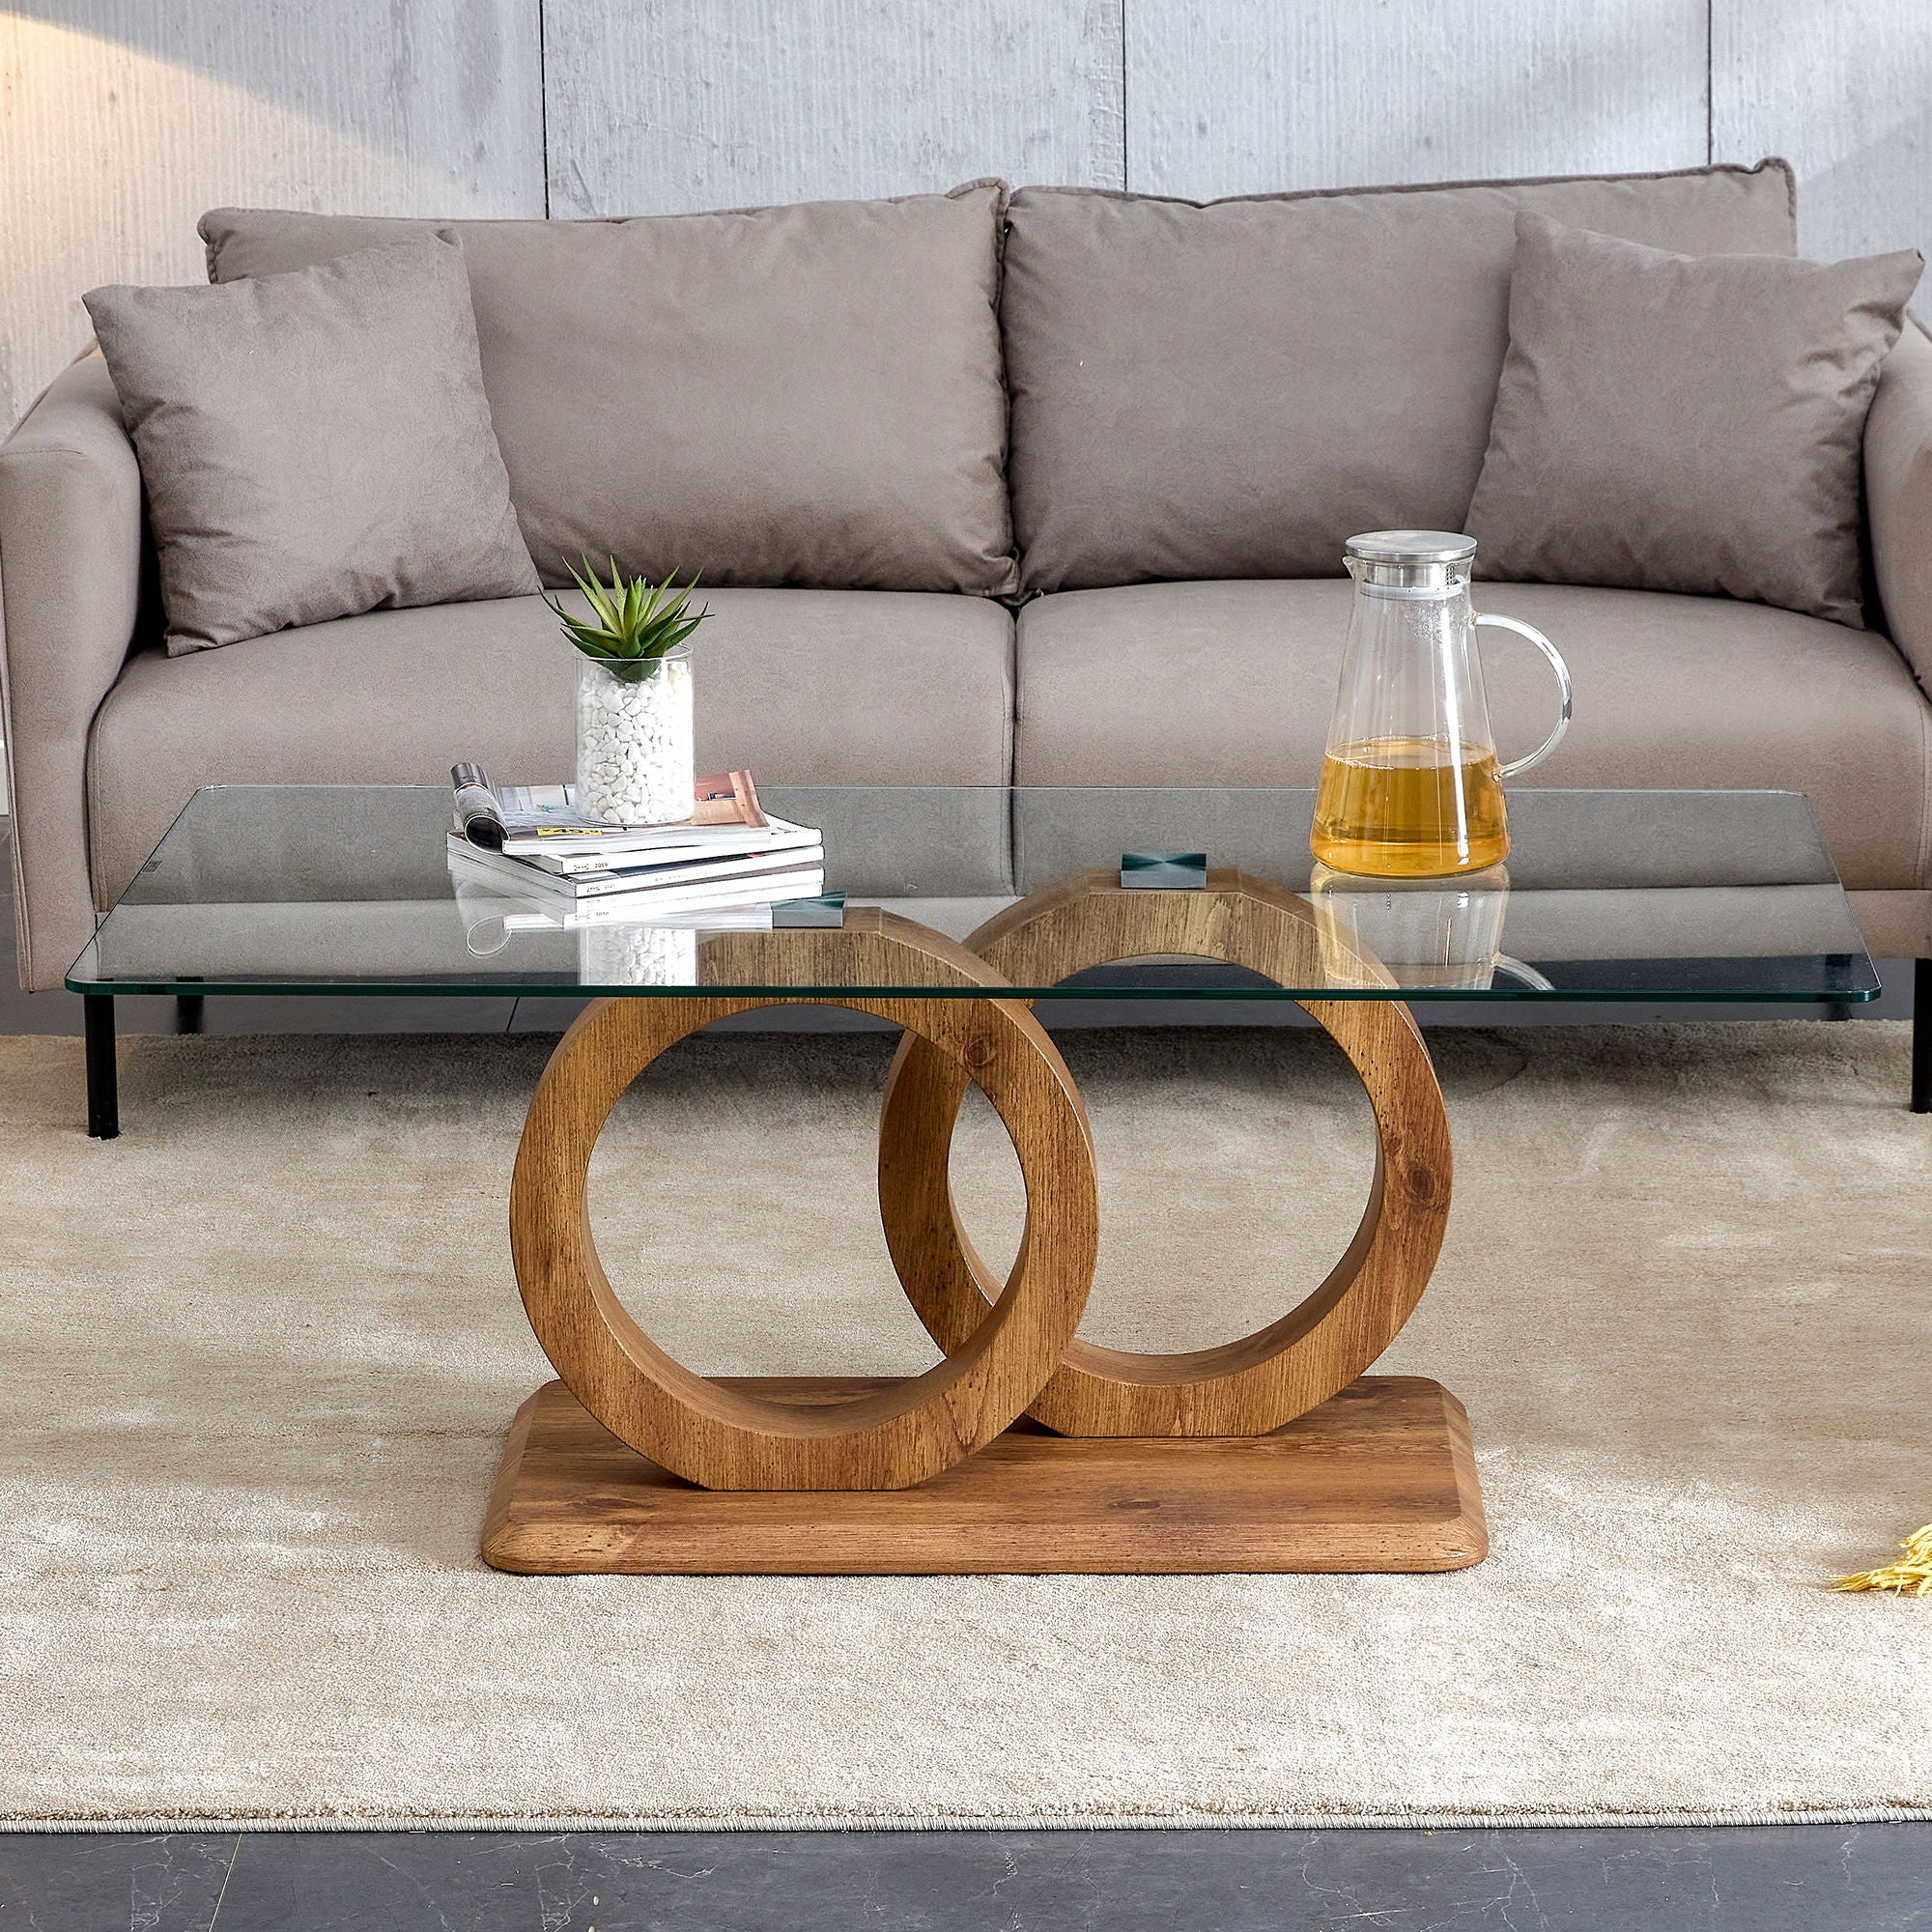 A Rectangular Modern And Fashionable Coffee Table With Tempered Glass Tabletop And Wood Grain Table Legs Suitable For Living Room